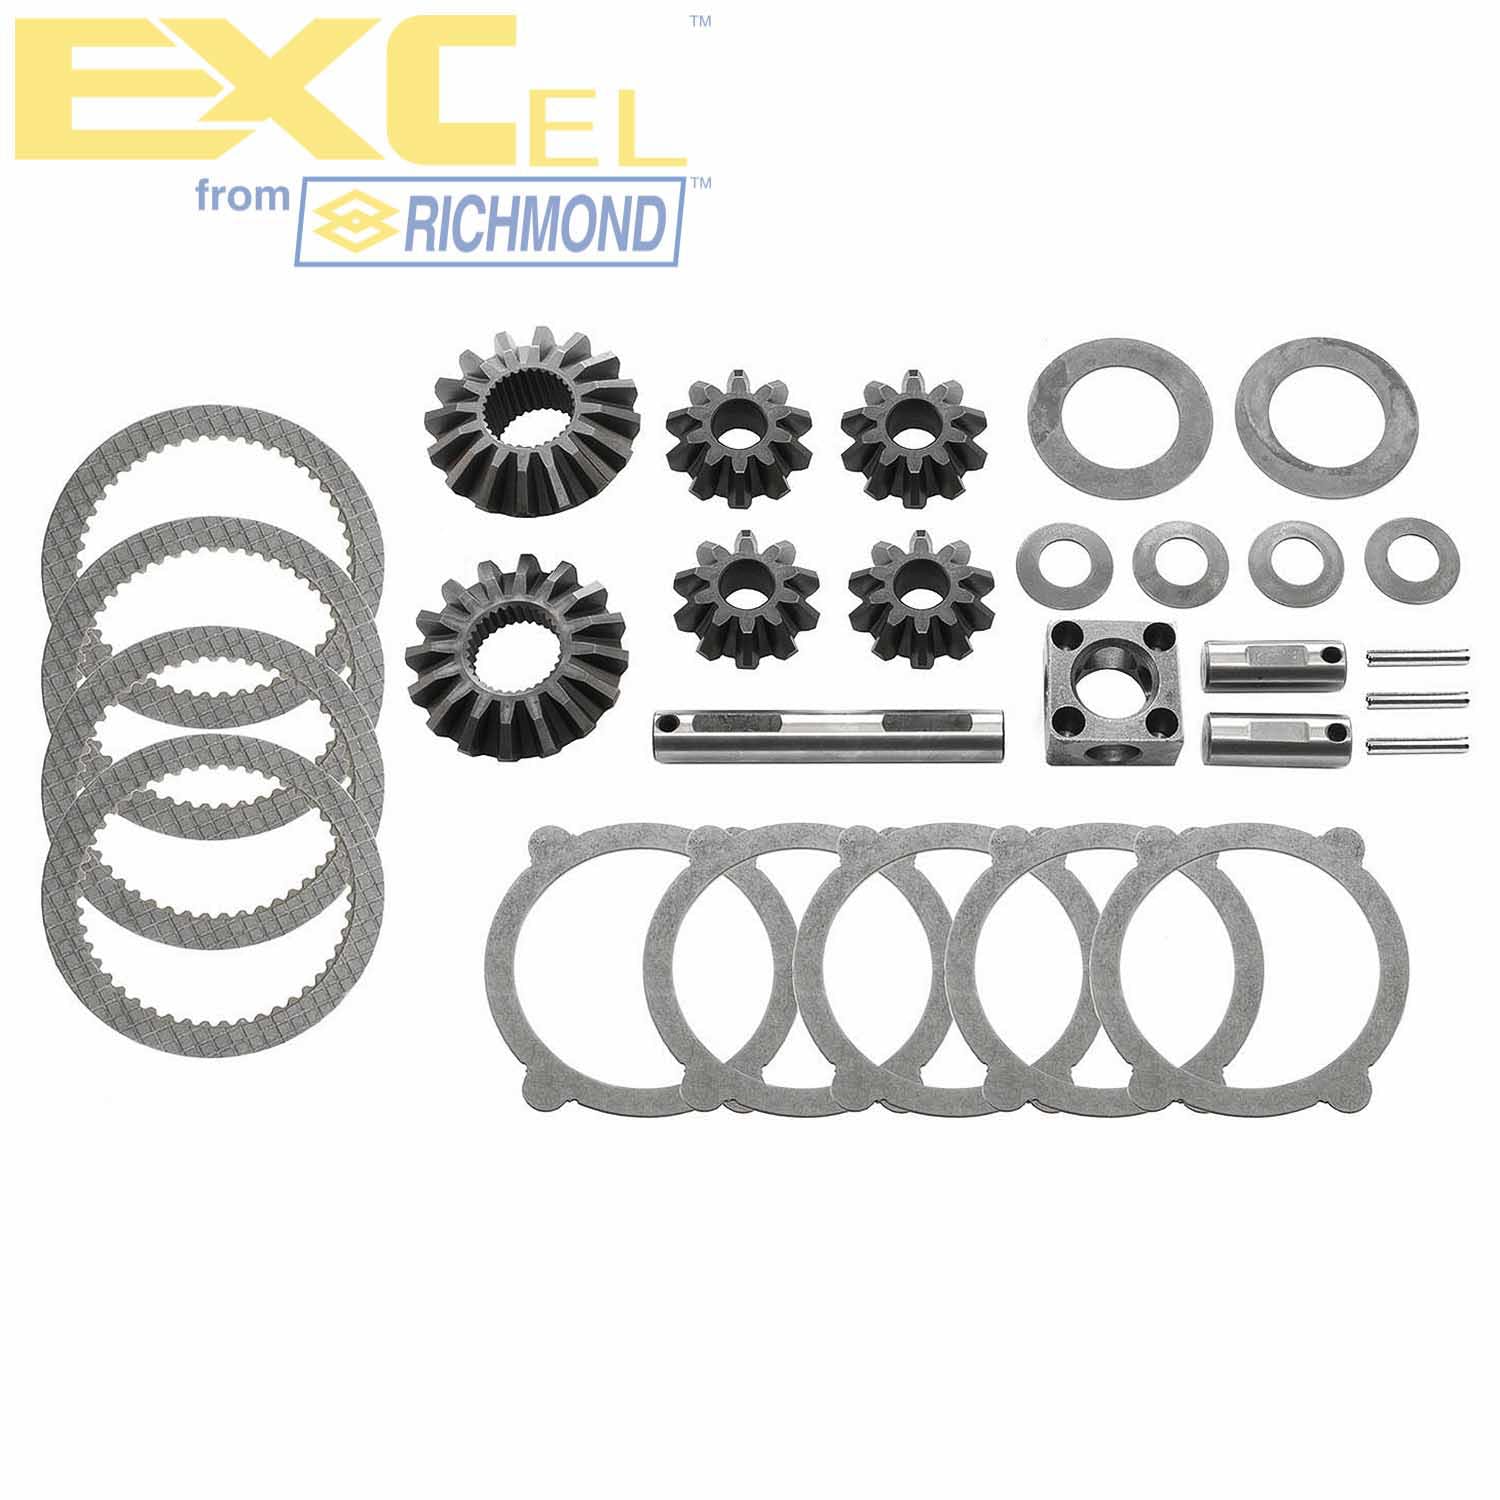 Excel XL-4026 Differential Carrier Gear Kit